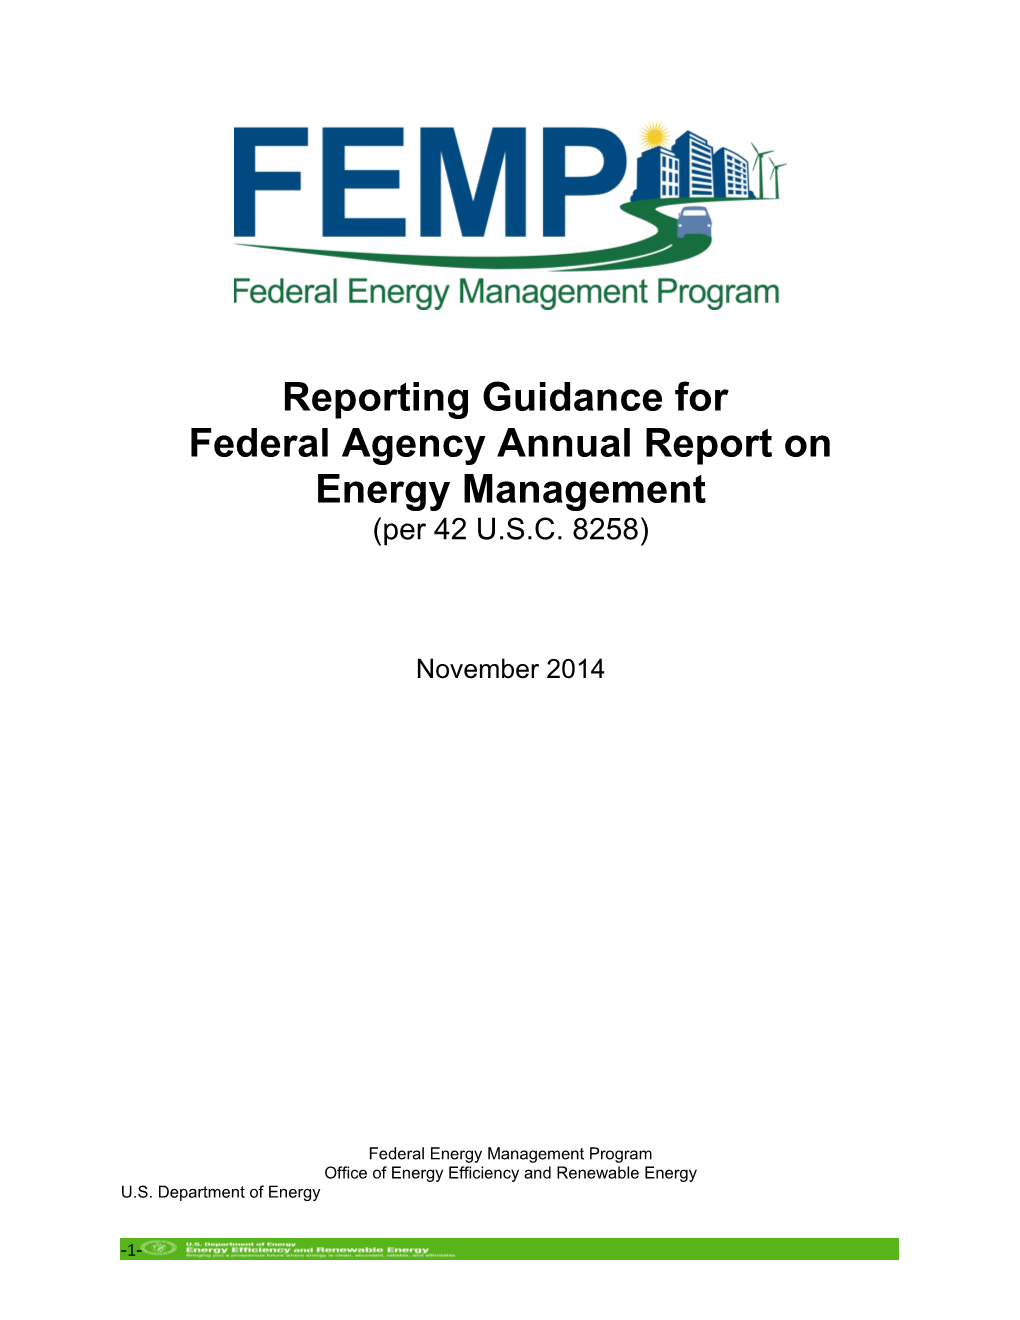 Federal Agency Annual Report on Energy Management